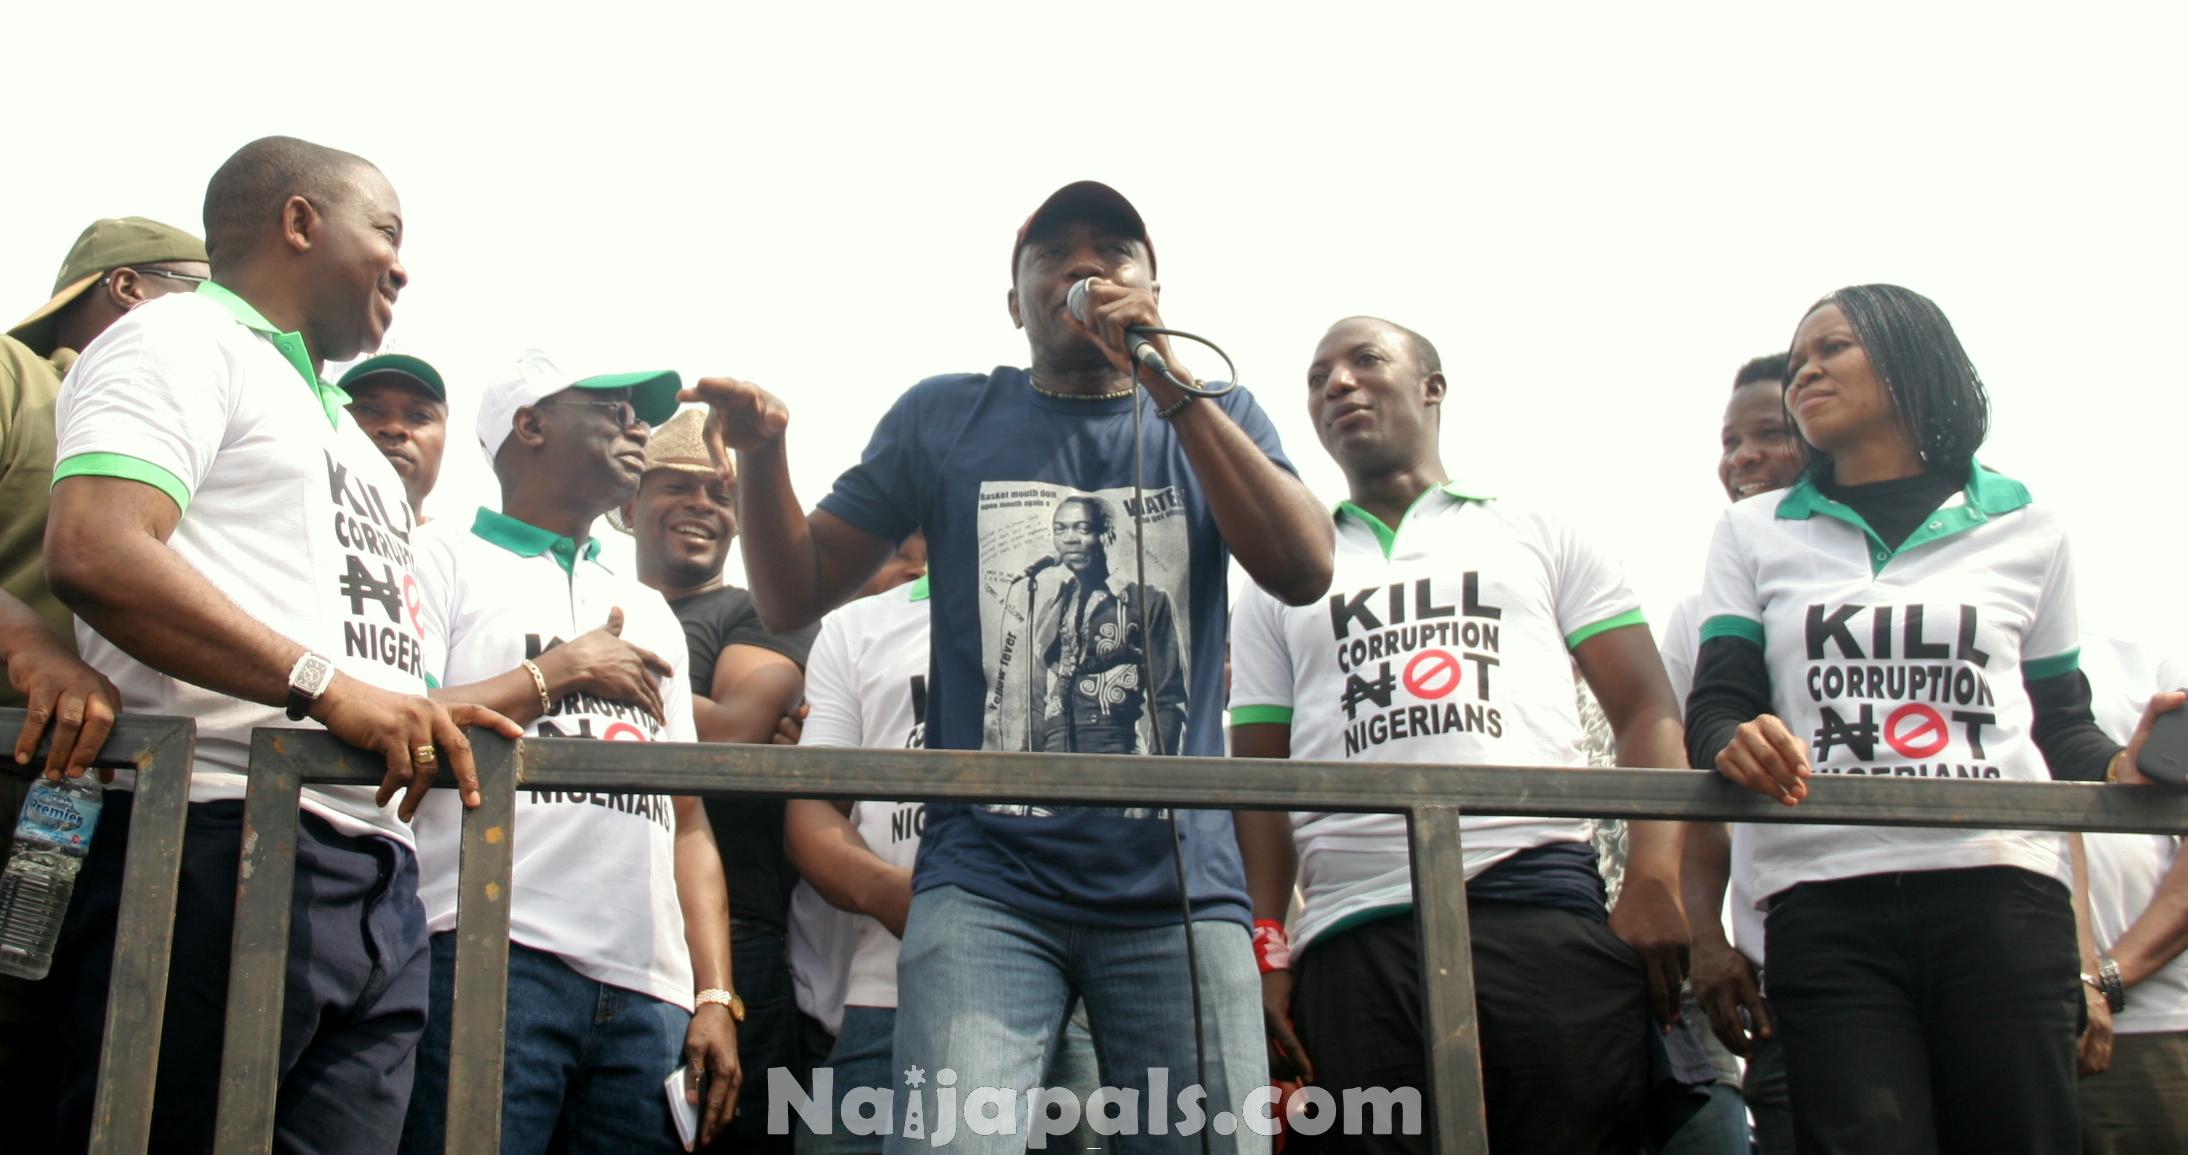 Day 2 Fuel Subsidy Protests Nigeria (3)